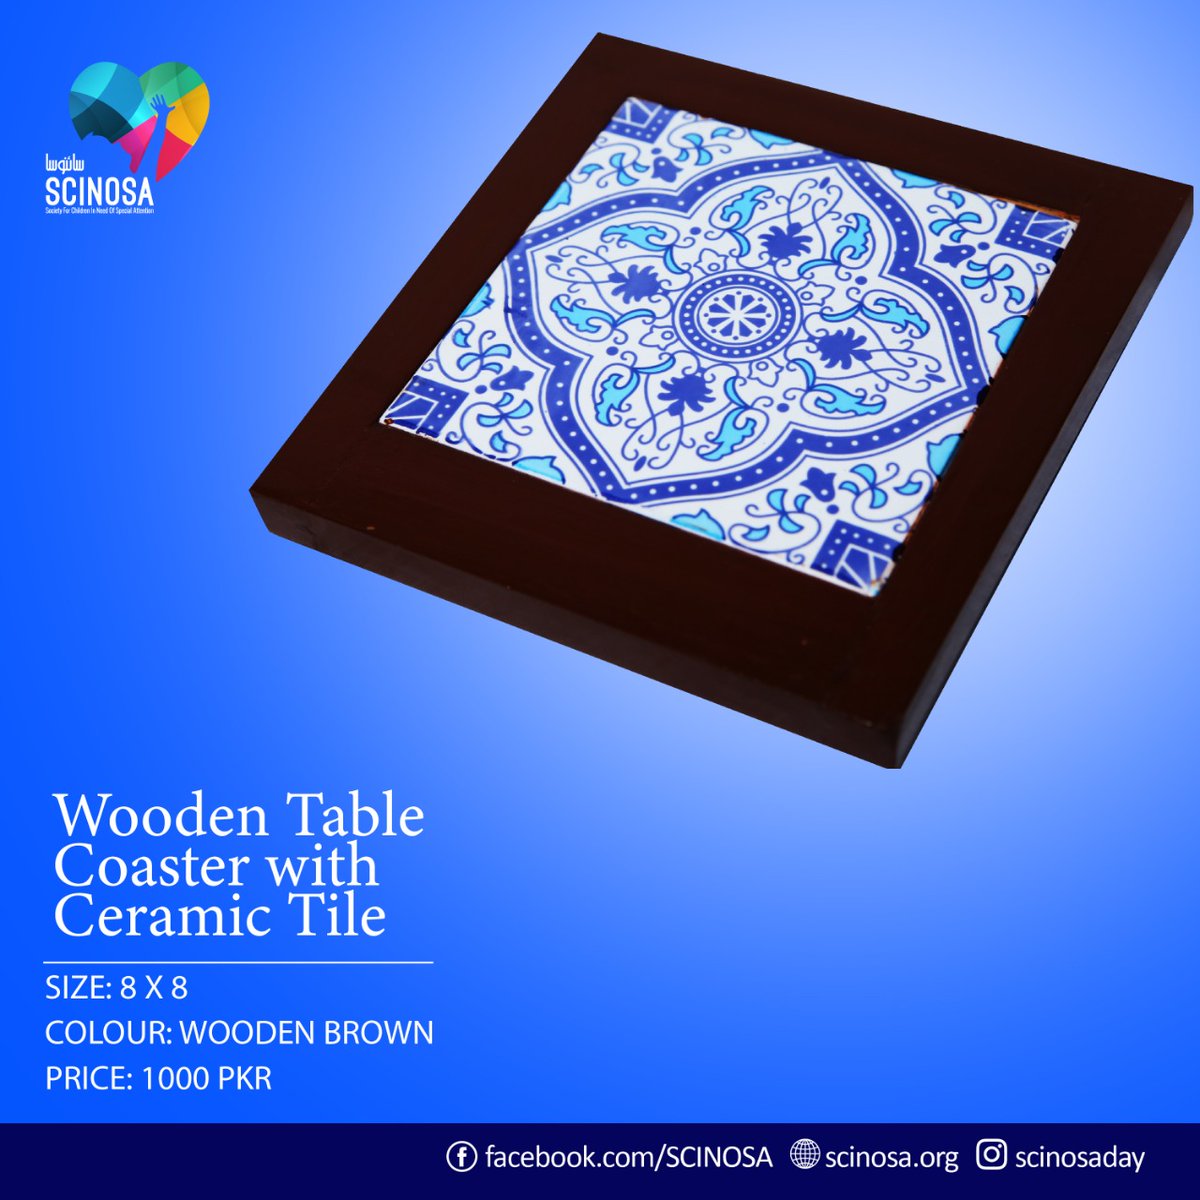 WOODEN TABLE COASTERS with CERAMIC TILE.
All the products have been crafted by the students of SCINOSA. Your purchase would help boost their confidence. To place an order you can DM or contact us on 03367246672
**ONLY FOR KARACHI #scinosadayhome #tablecoasters  #sale #Pakistan